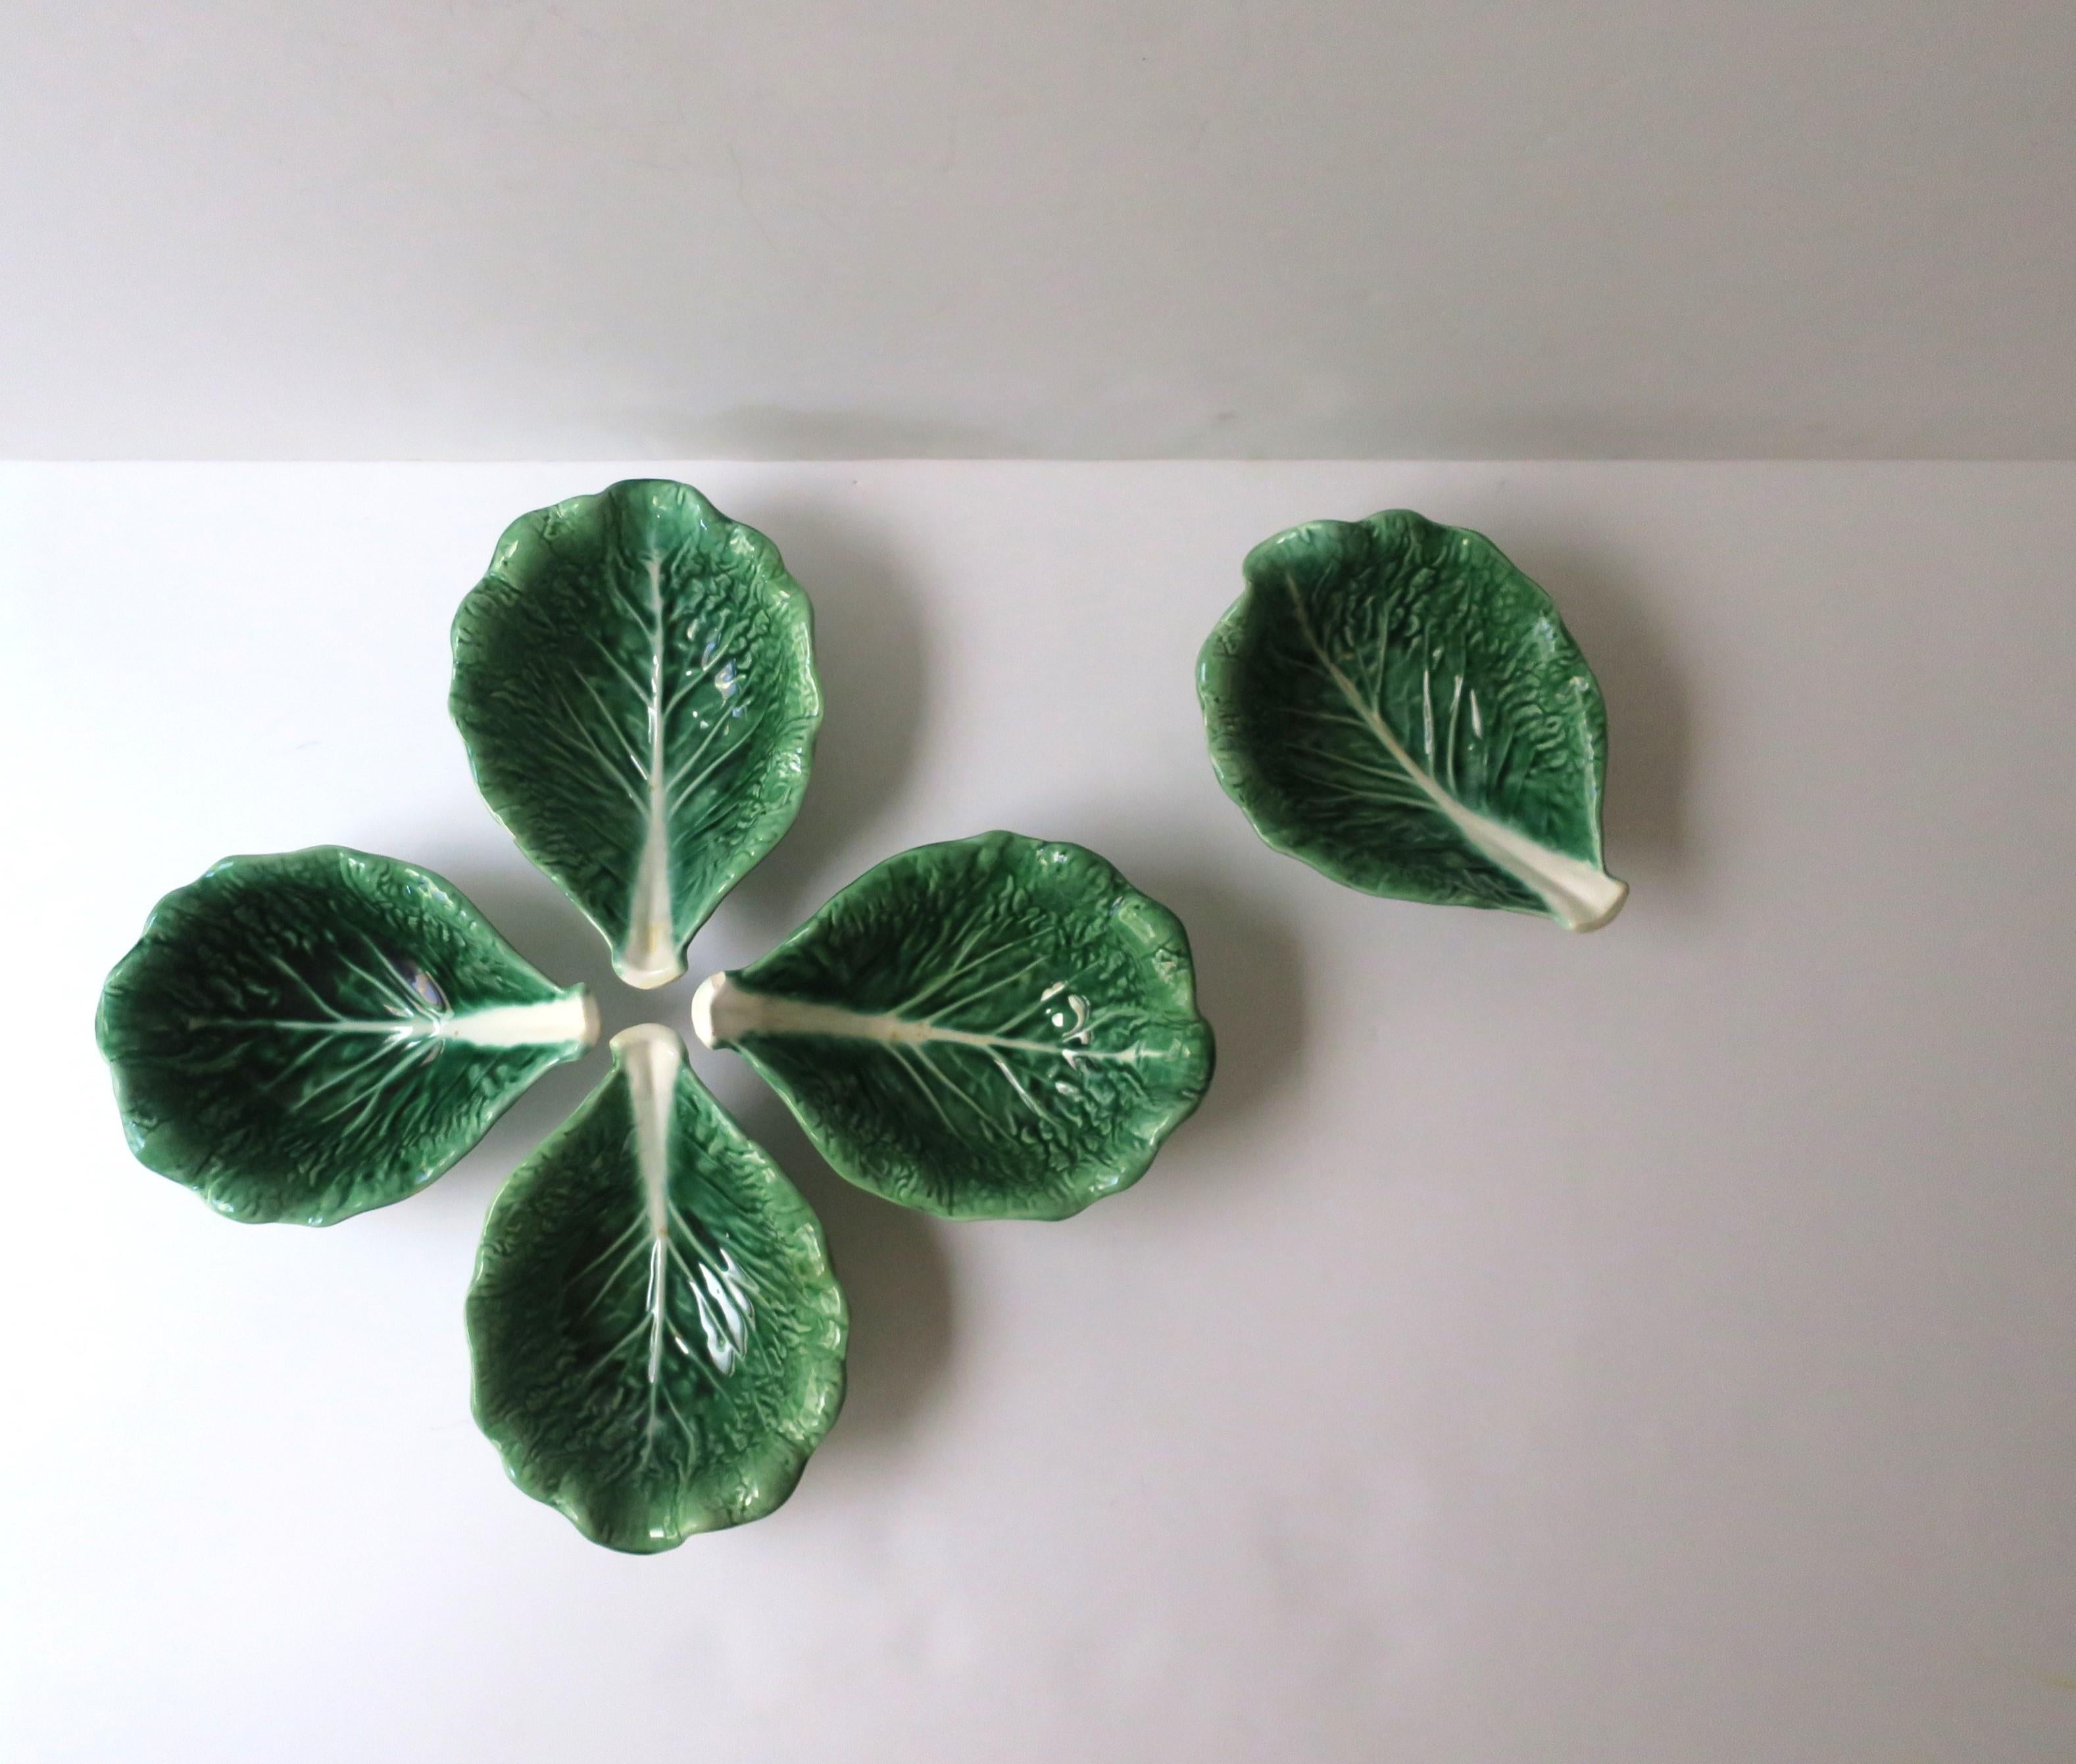 Glazed Green Lettuce or Cabbage Leaf Serving or Dip Bowl Trompe l'Oeil Style, 5 Avail For Sale